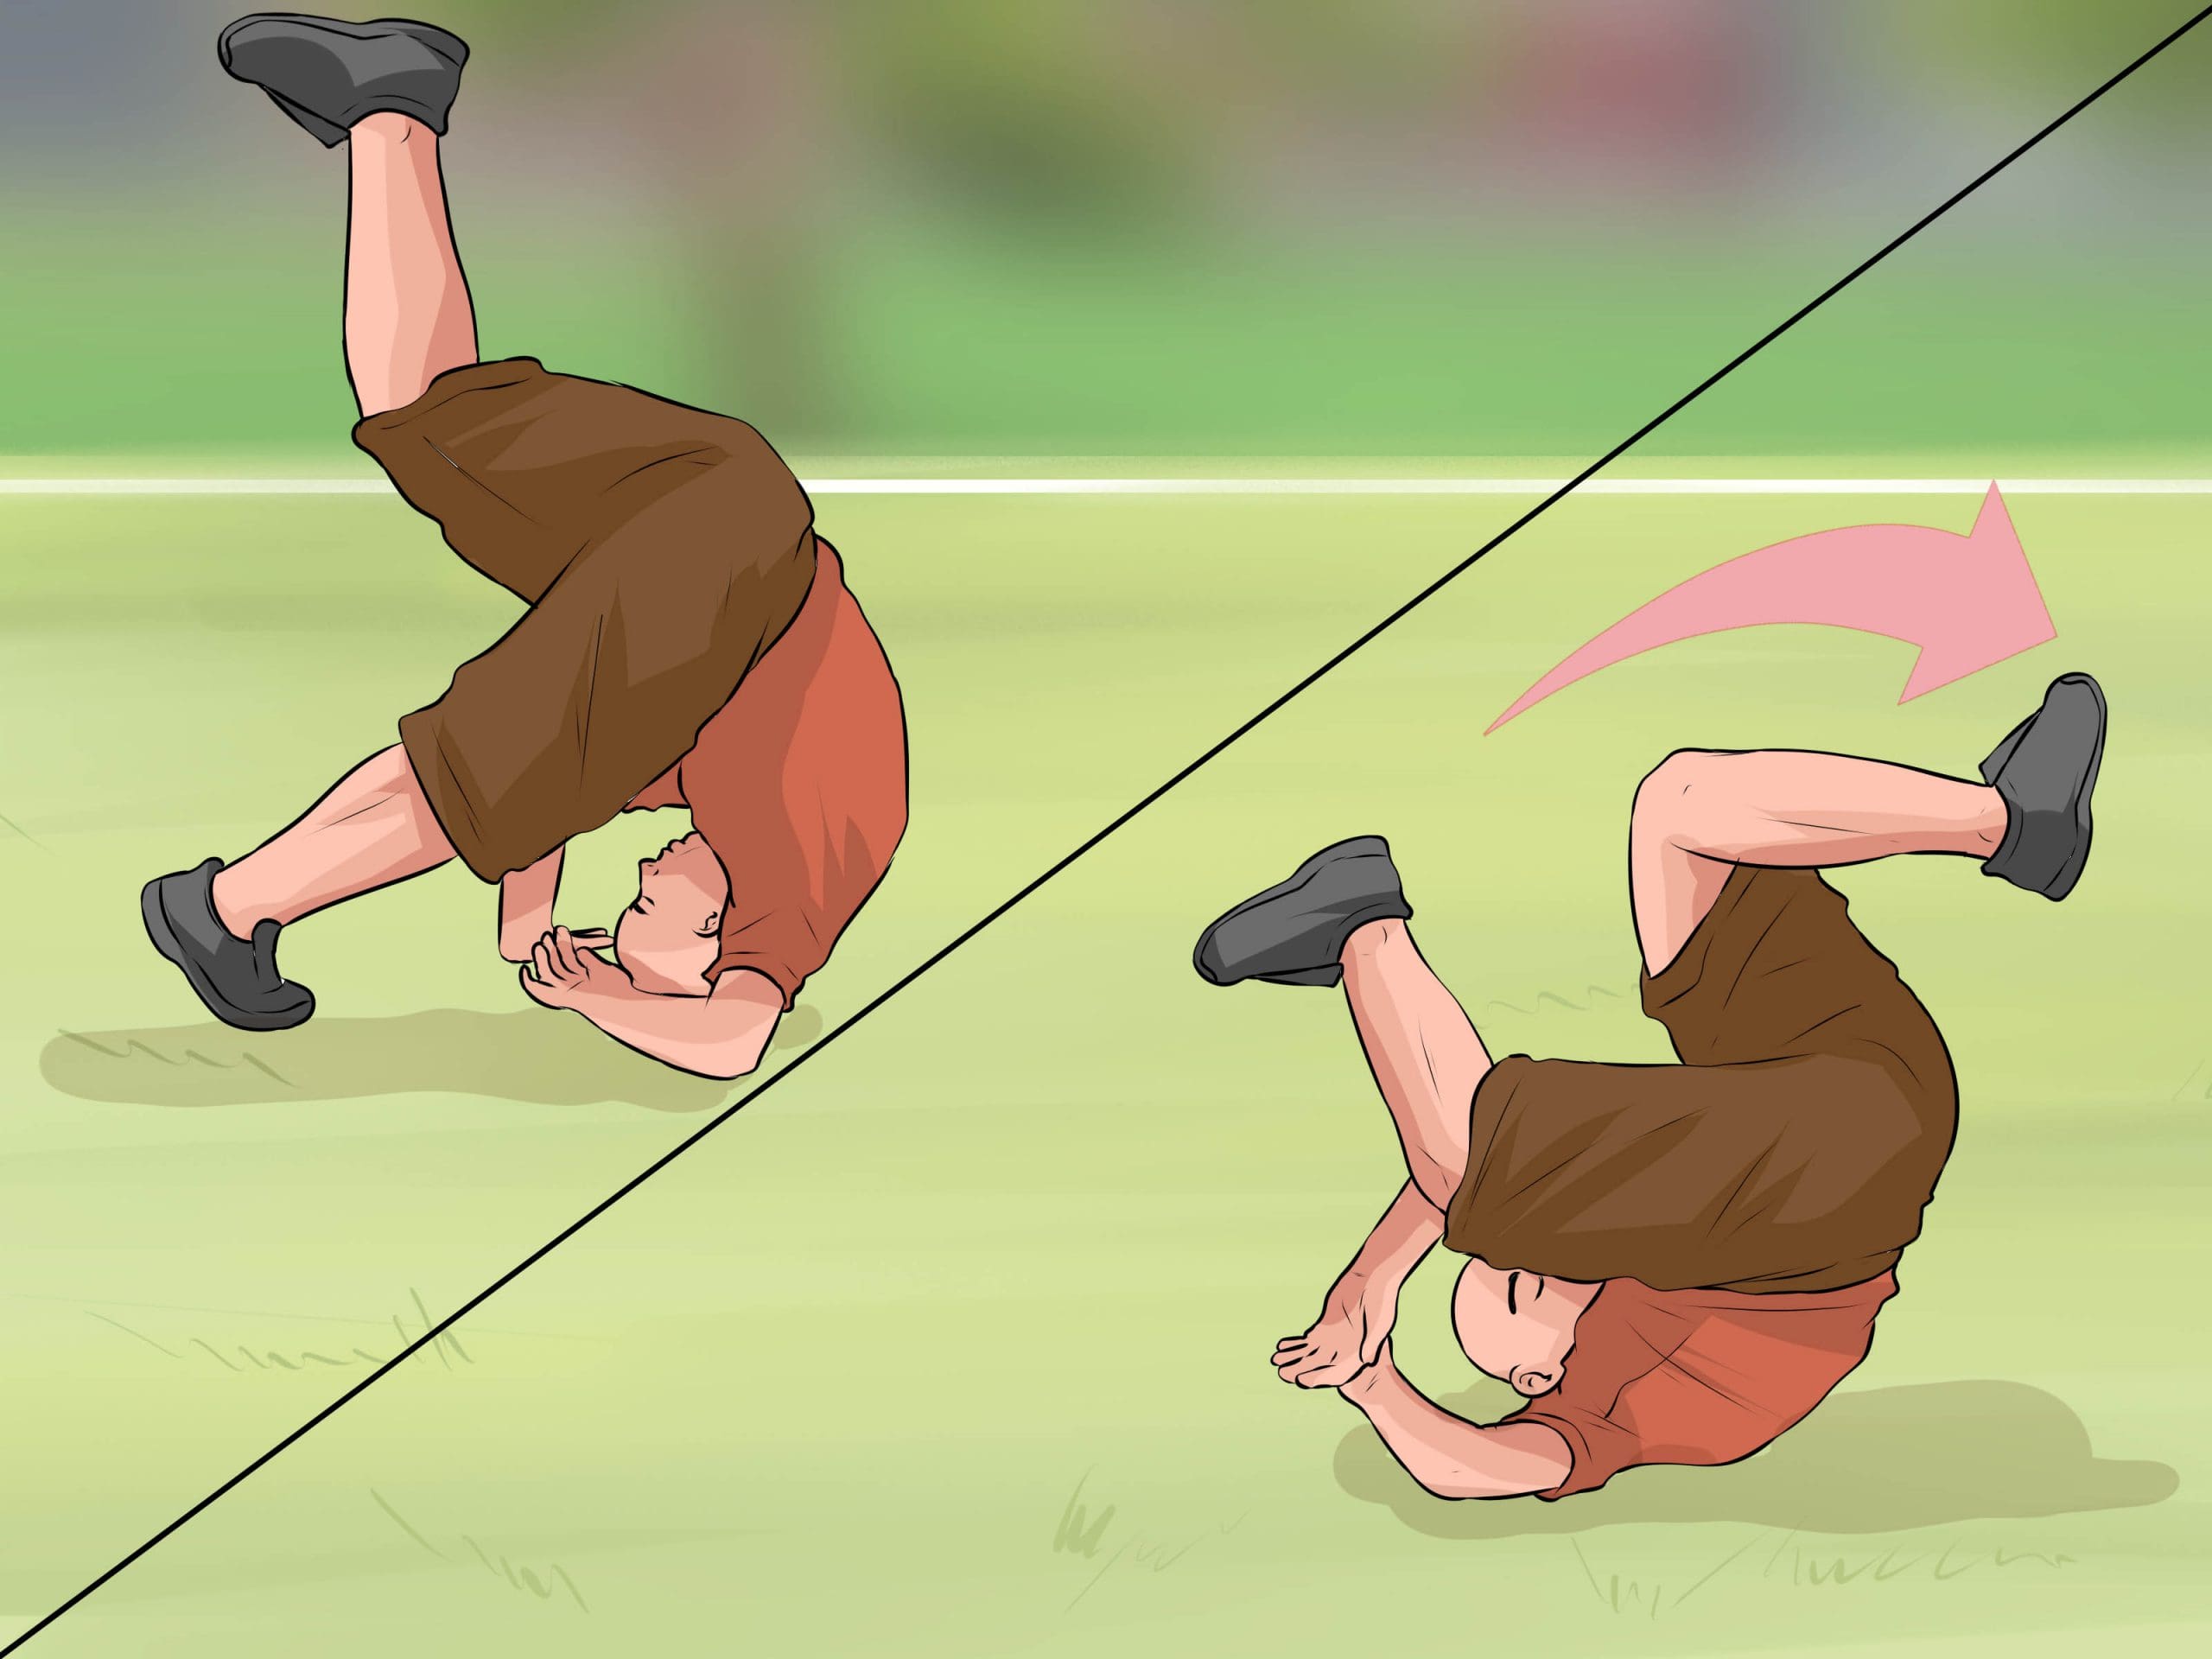 How to fall safely